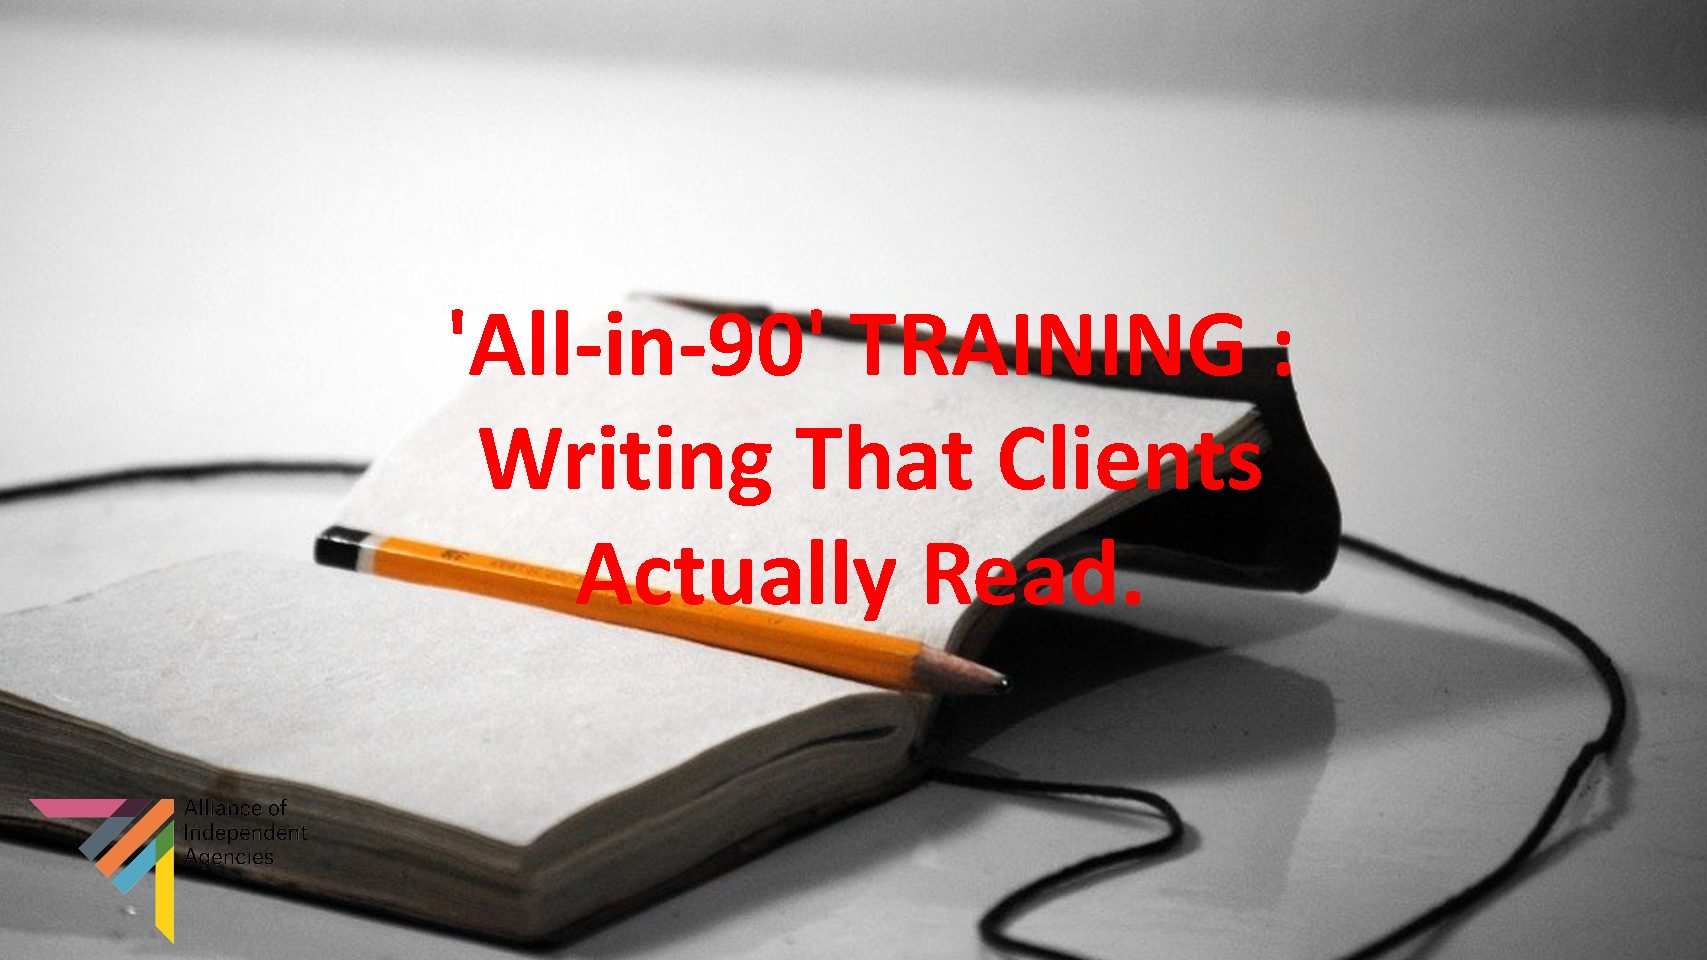 'All-in-90' TRAINING : Writing That Clients Actually Read